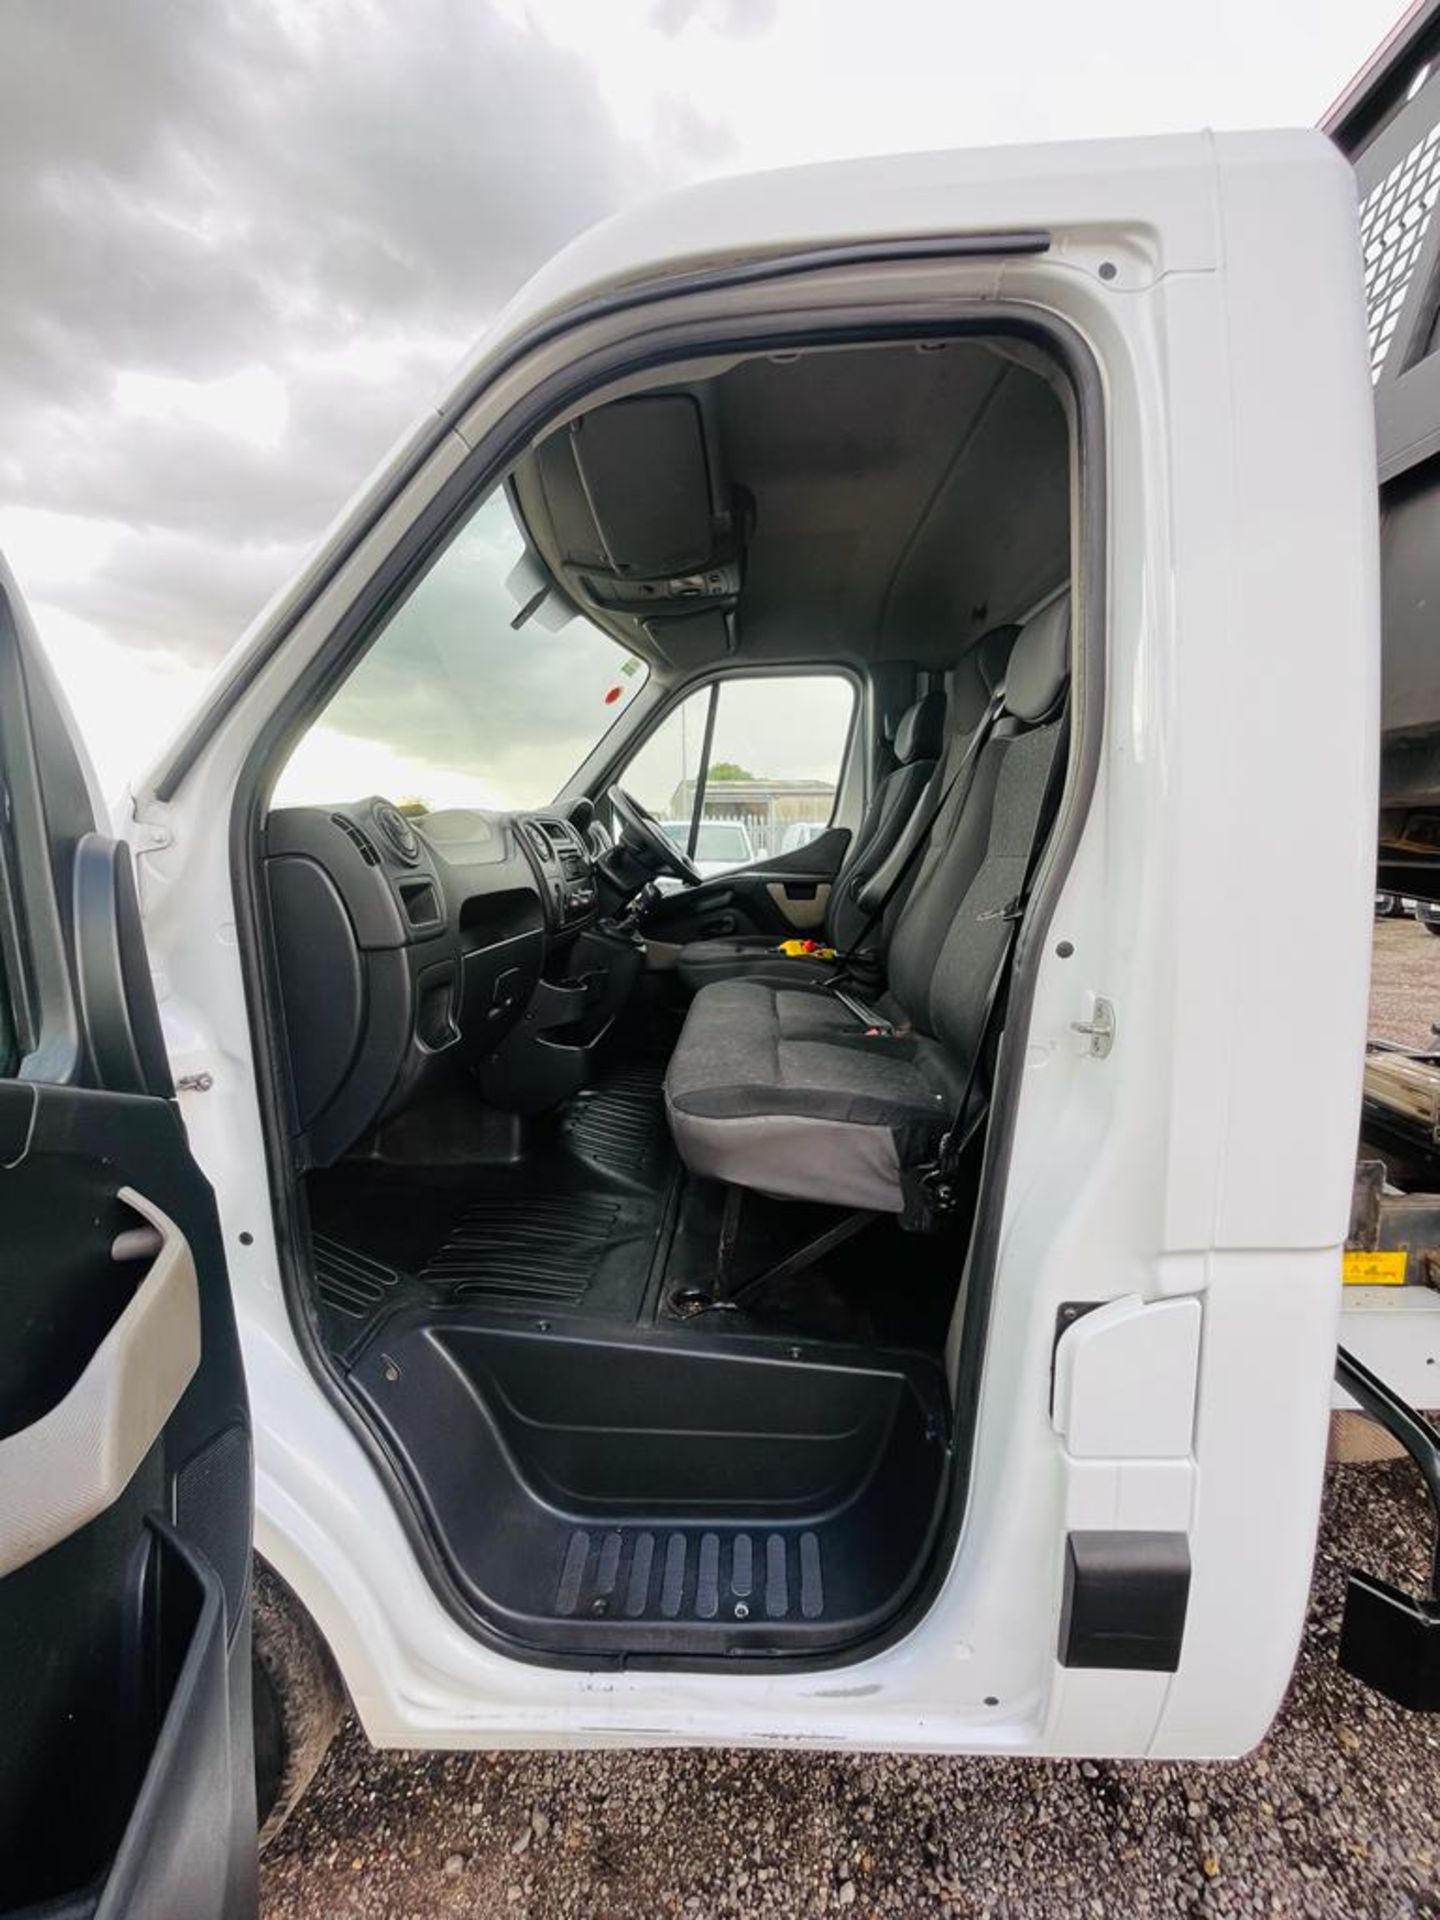 ** ON SALE ** Vauxhall Movano 2.3 CDTI RWD TRW R3500 2015 '15 Reg' Tipper - Only 110,779 Miles - Image 25 of 29